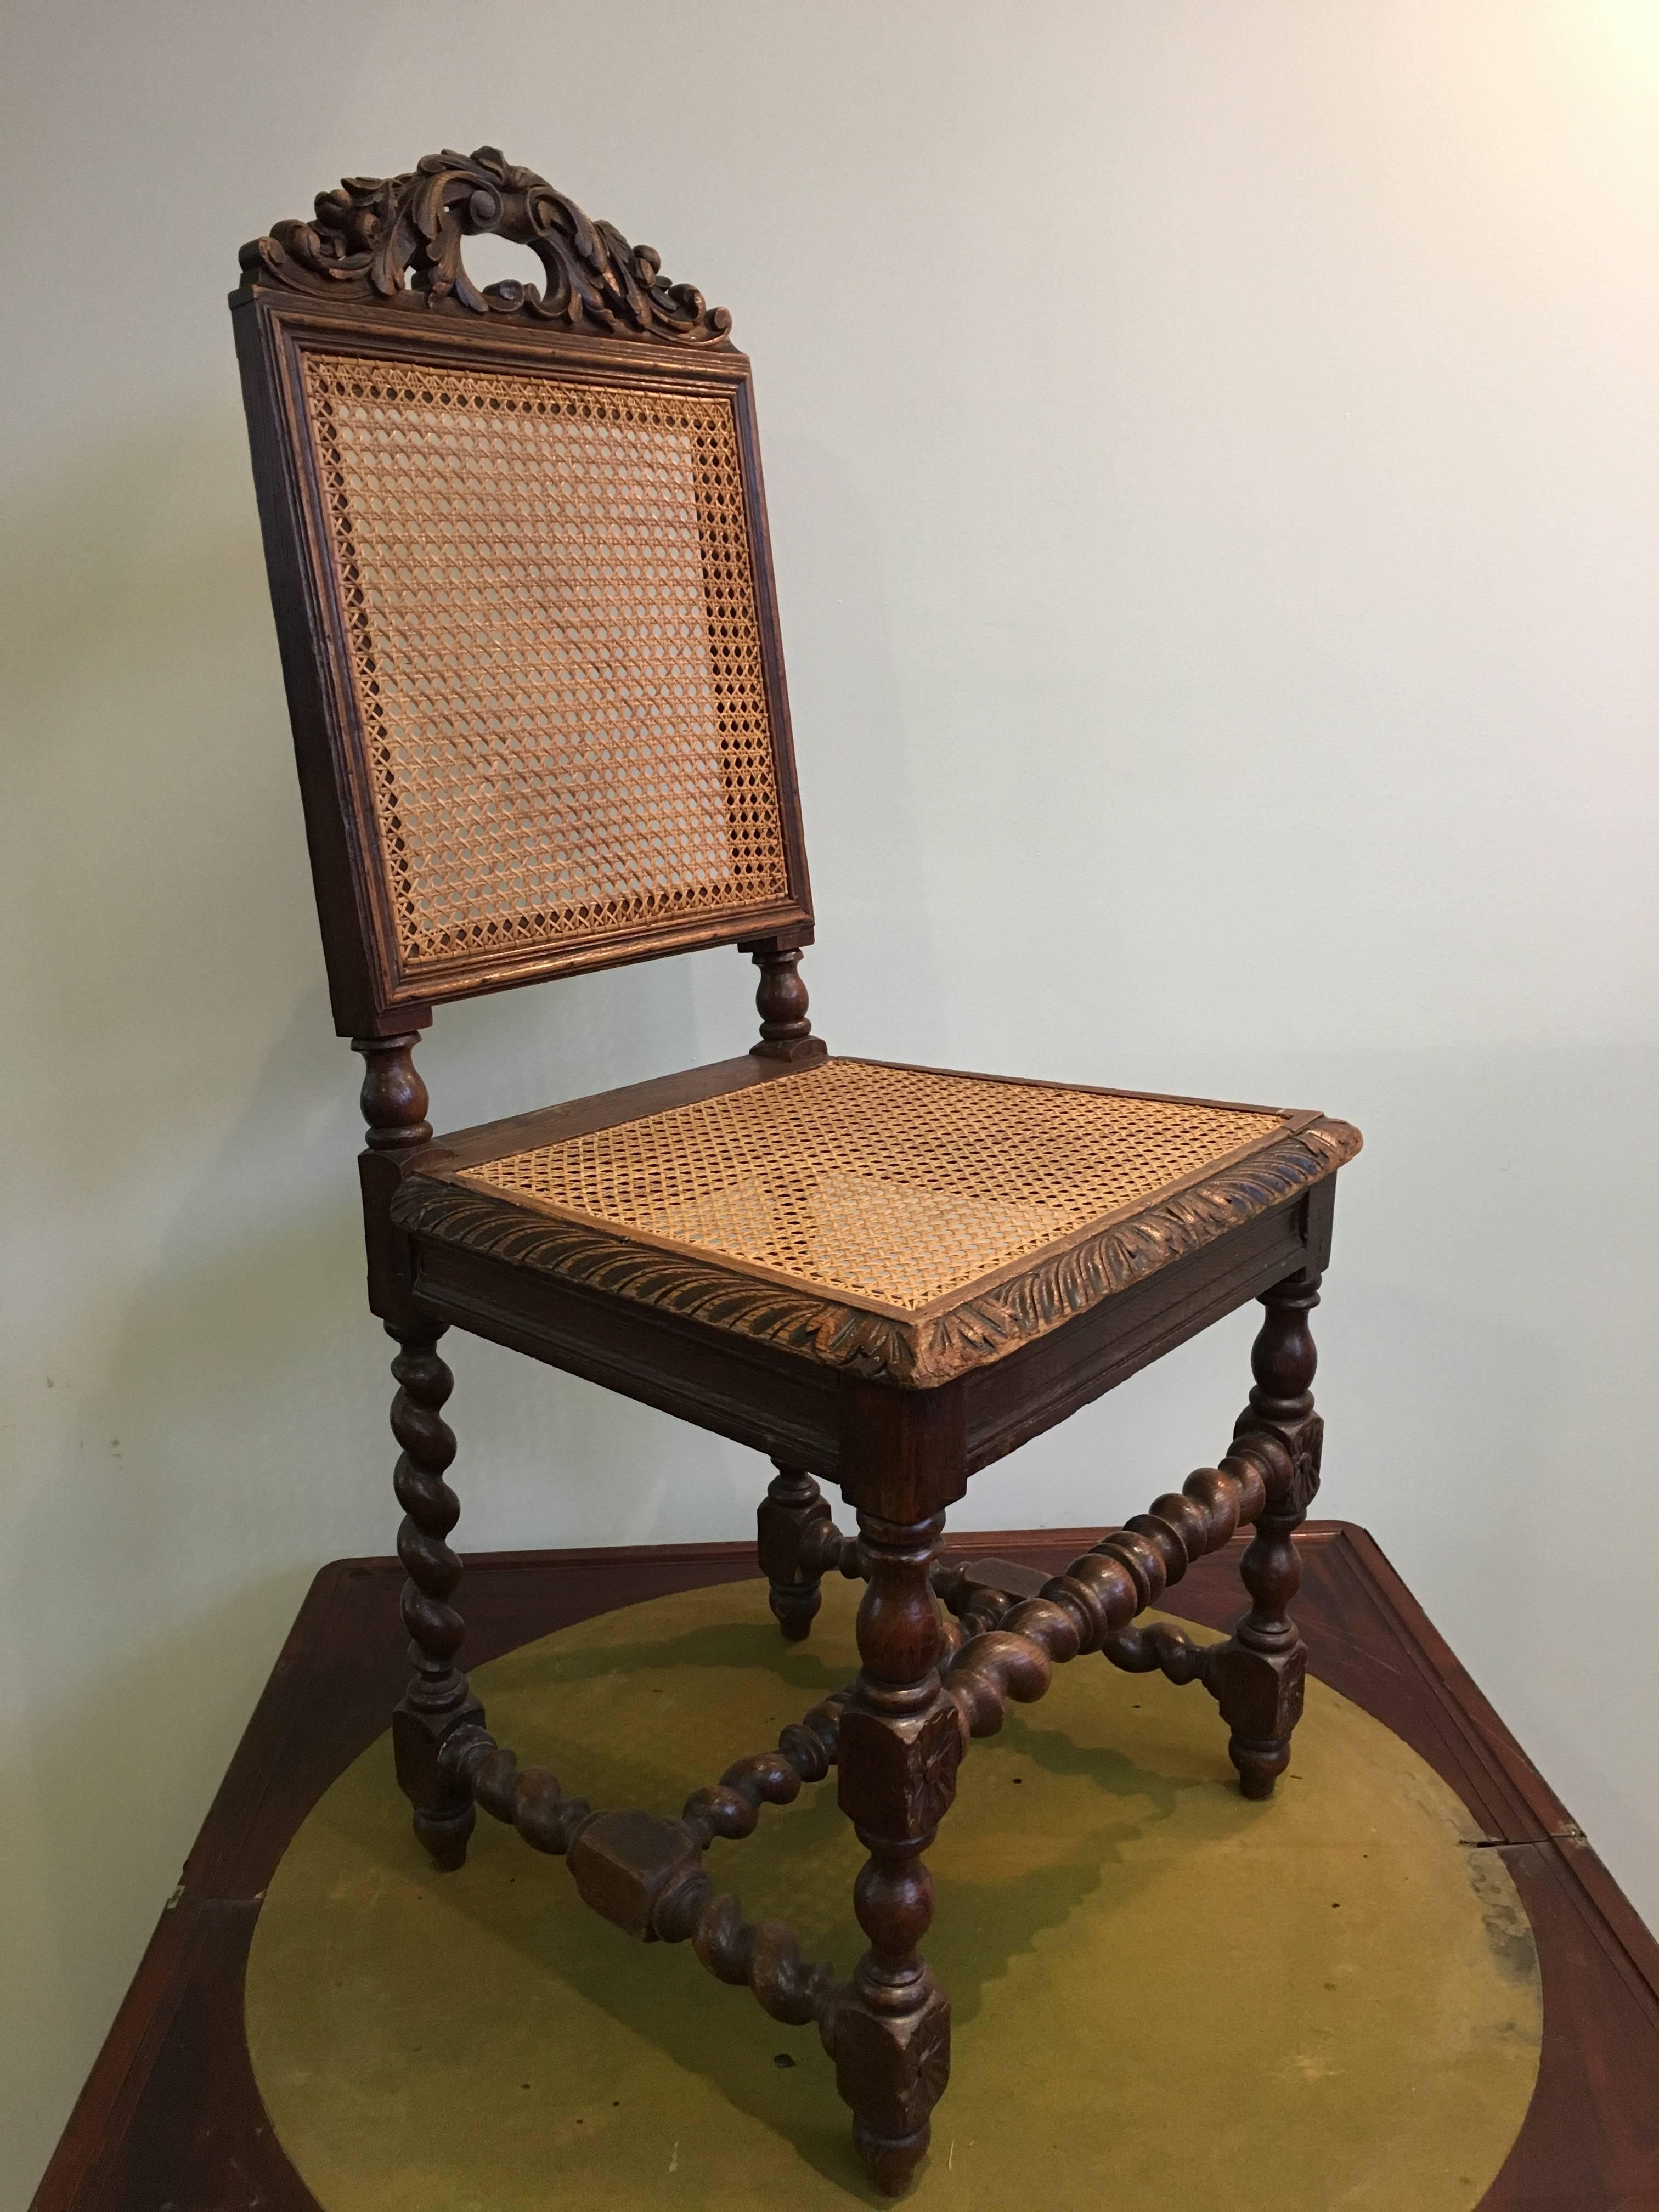 Four 19th century French carved walnut dining chairs in style of Louis Philippe. With hand-caned seats and backs. The chairs are raised on elegantly carved legs, France, circa 1830.
Good condition.